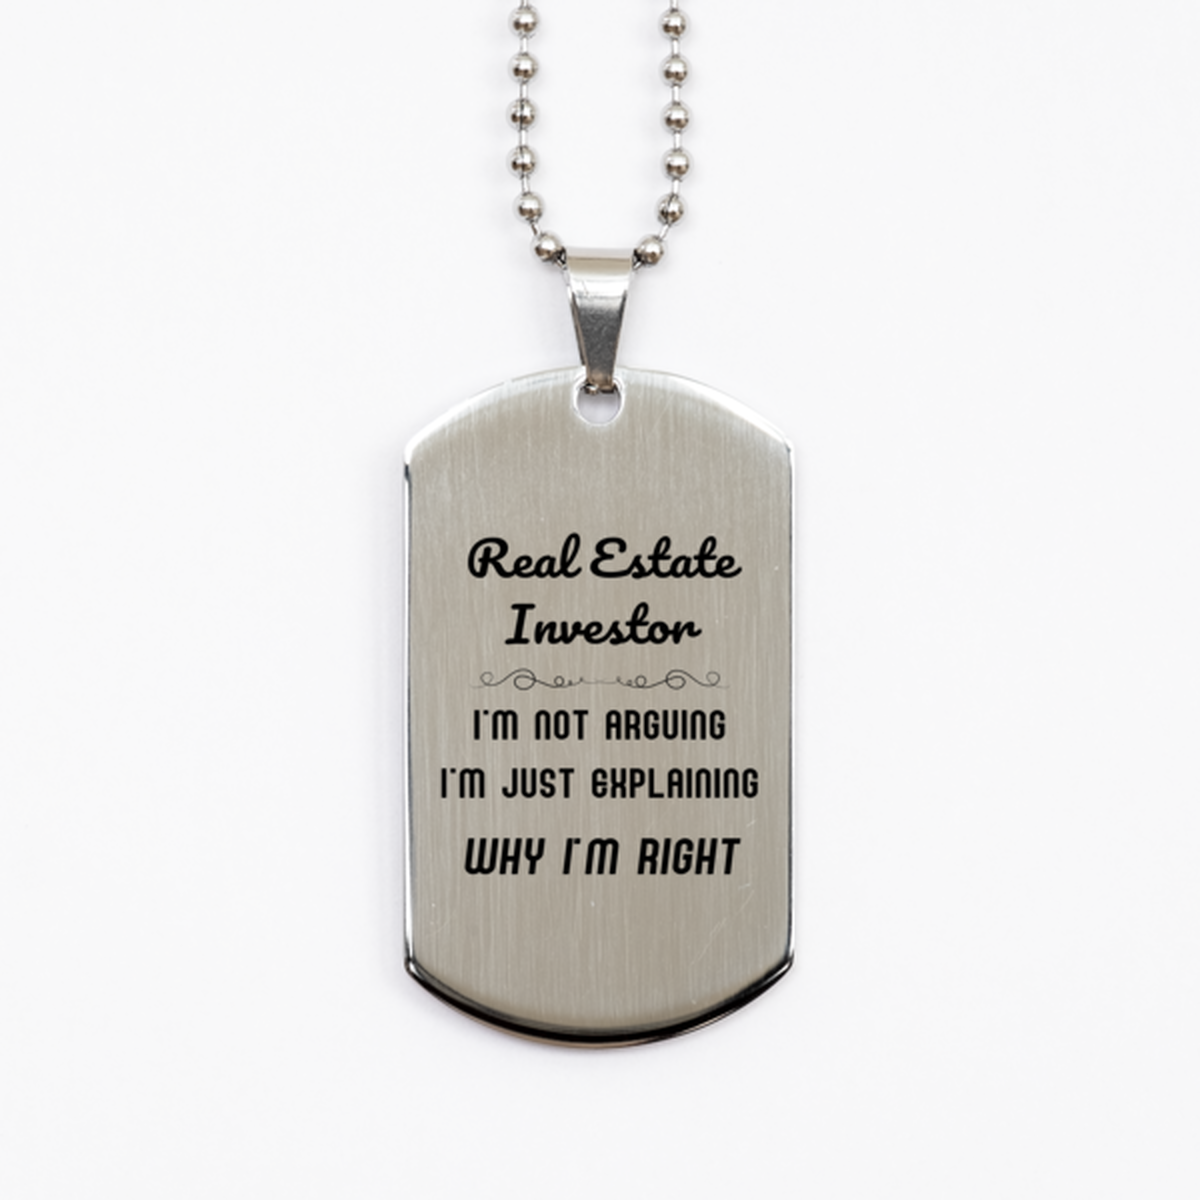 Real Estate Investor I'm not Arguing. I'm Just Explaining Why I'm RIGHT Silver Dog Tag, Funny Saying Quote Real Estate Investor Gifts For Real Estate Investor Graduation Birthday Christmas Gifts for Men Women Coworker